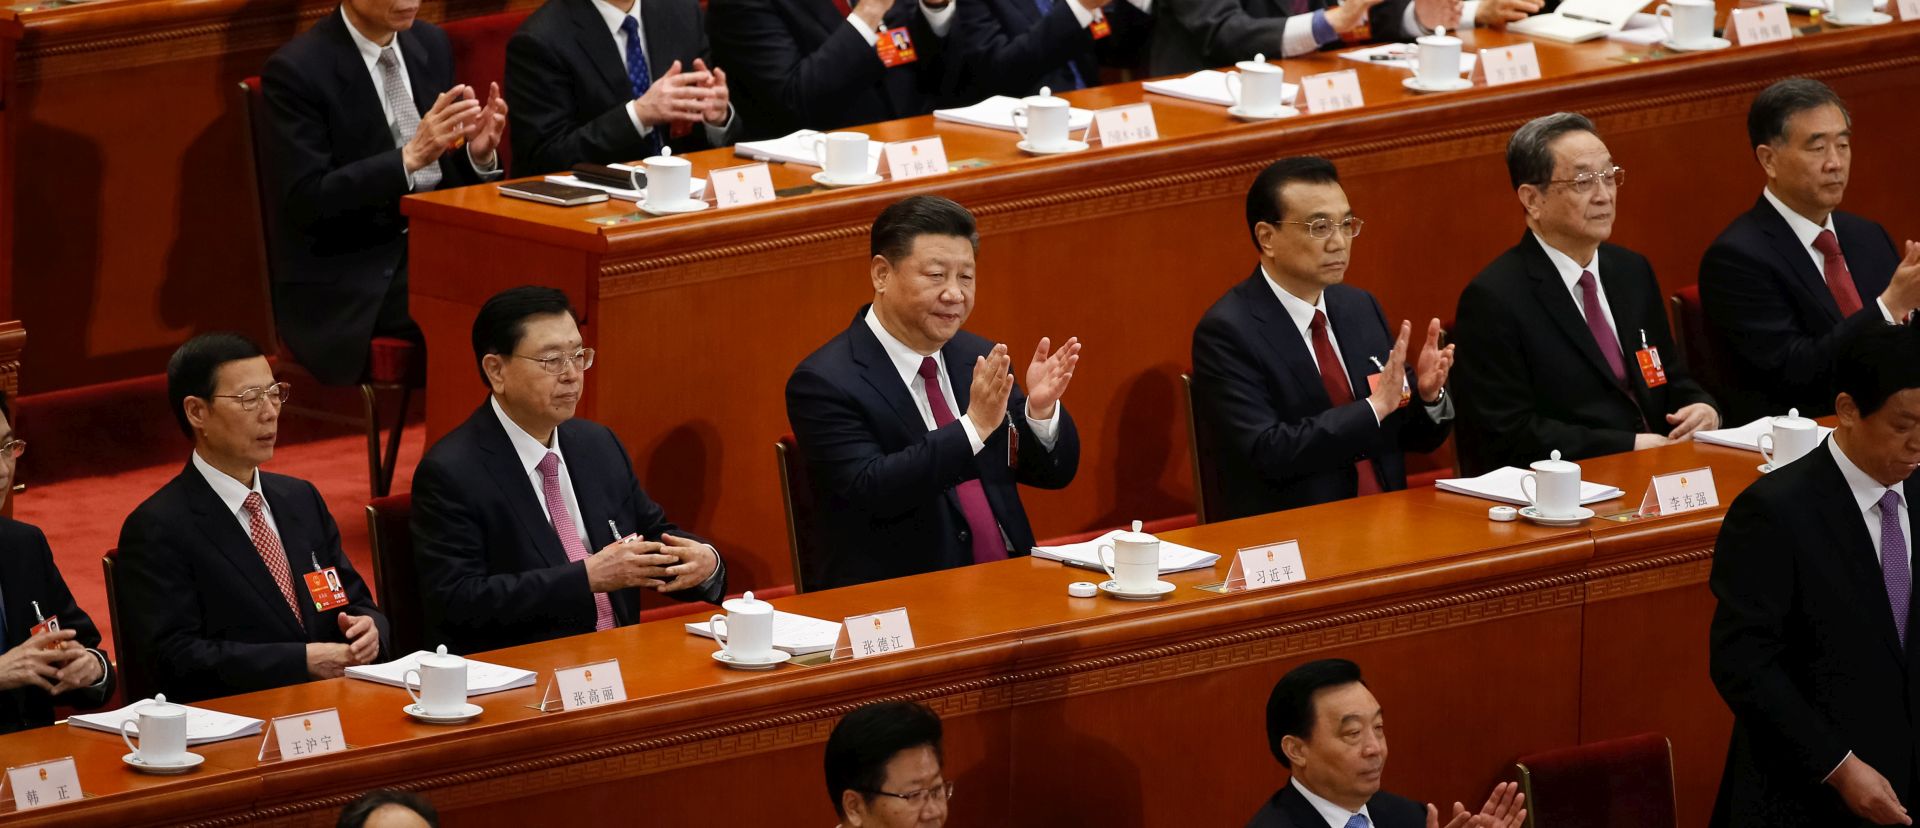 epa06580796 Chinese President Xi Jinping (C-L) and Chinese Premier Li Keqiang (C-R) with other delegates clap during the opening of the first Plenary Session of the 13th National People's Congress (NPC) at the Great Hall of the People (GHOP) in Beijing, China, 05 March 2018. The NPC has over 3,000 delegates and is the world's largest parliament or legislative assembly though its function is largely as a formal seal of approval for the policies fixed by the leaders of the Chinese Communist Party. The NPC runs alongside the annual plenary meetings of the Chinese People's Political Consultative Conference (CPPCC), together known as 'Lianghui' or 'Two Meetings'.  EPA/ROMAN PILIPEY